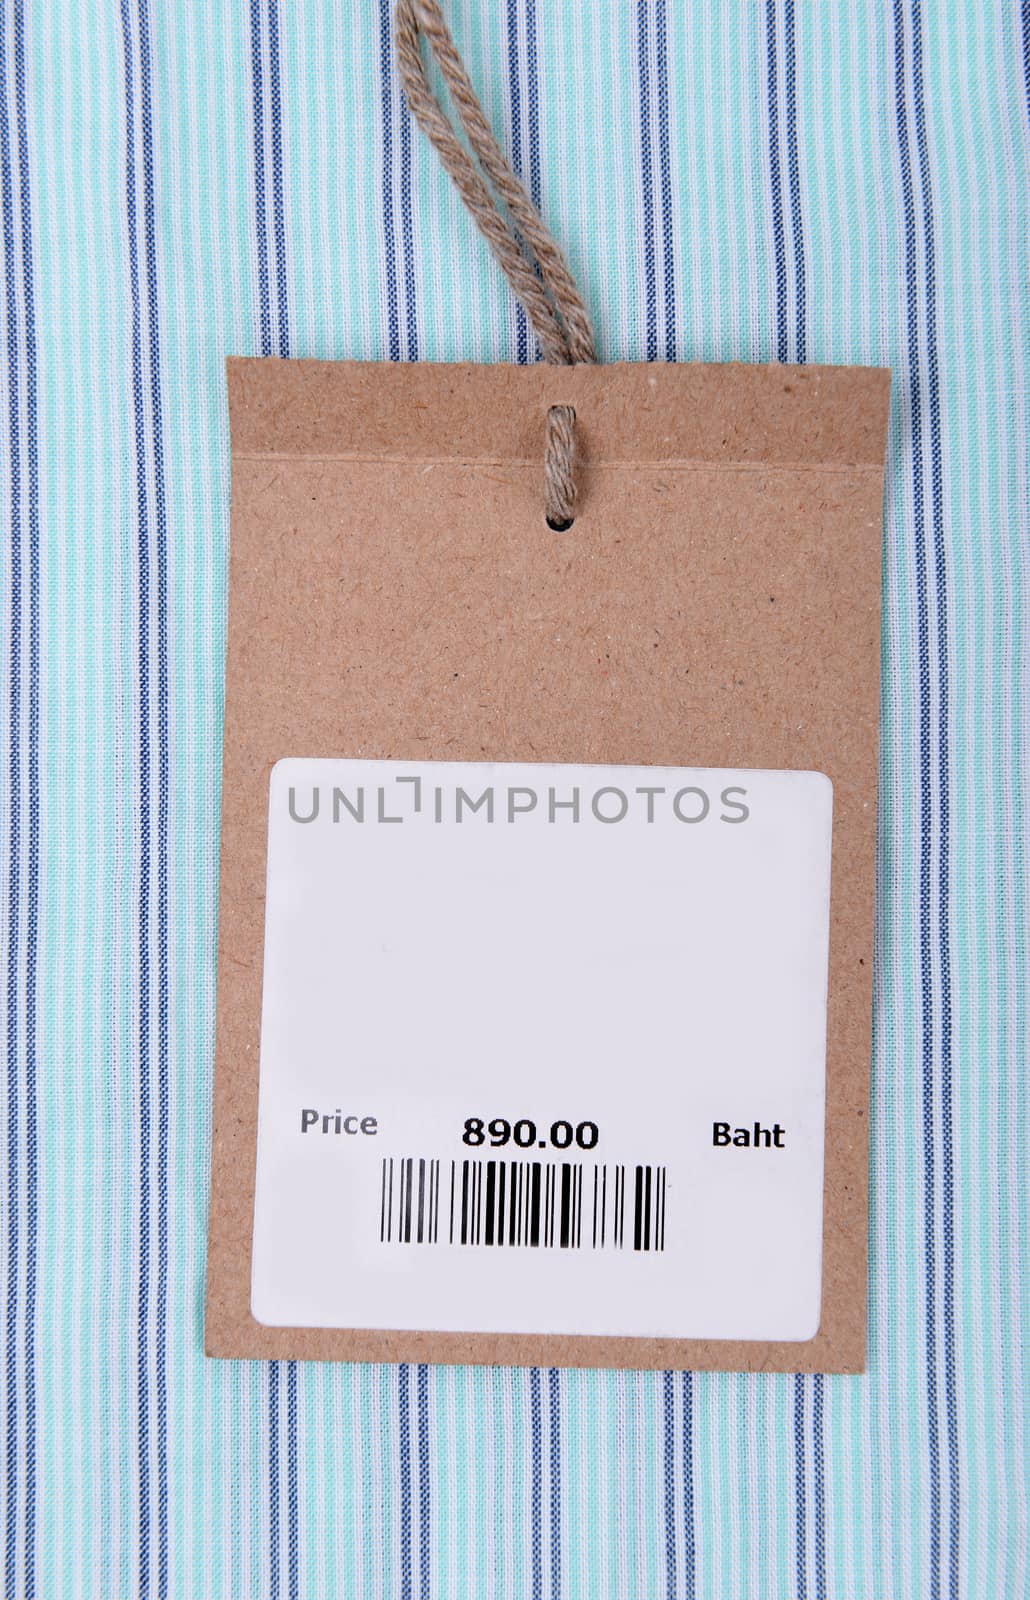 price tag with barcode on shirt by anankkml